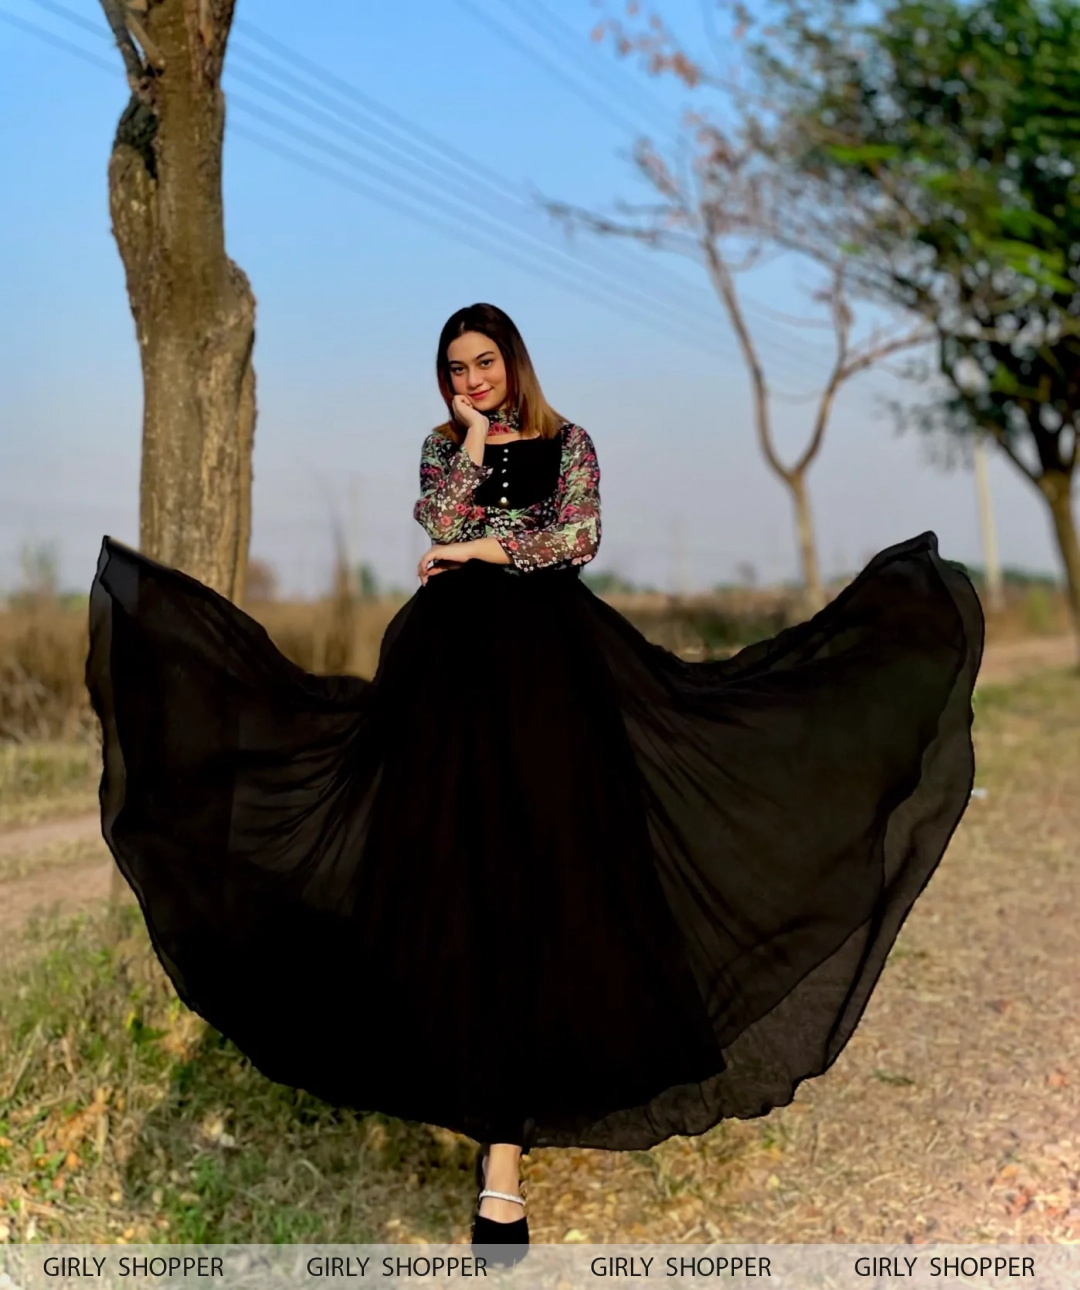 Heavy gher gown | Clothes design, Gowns, Outfits